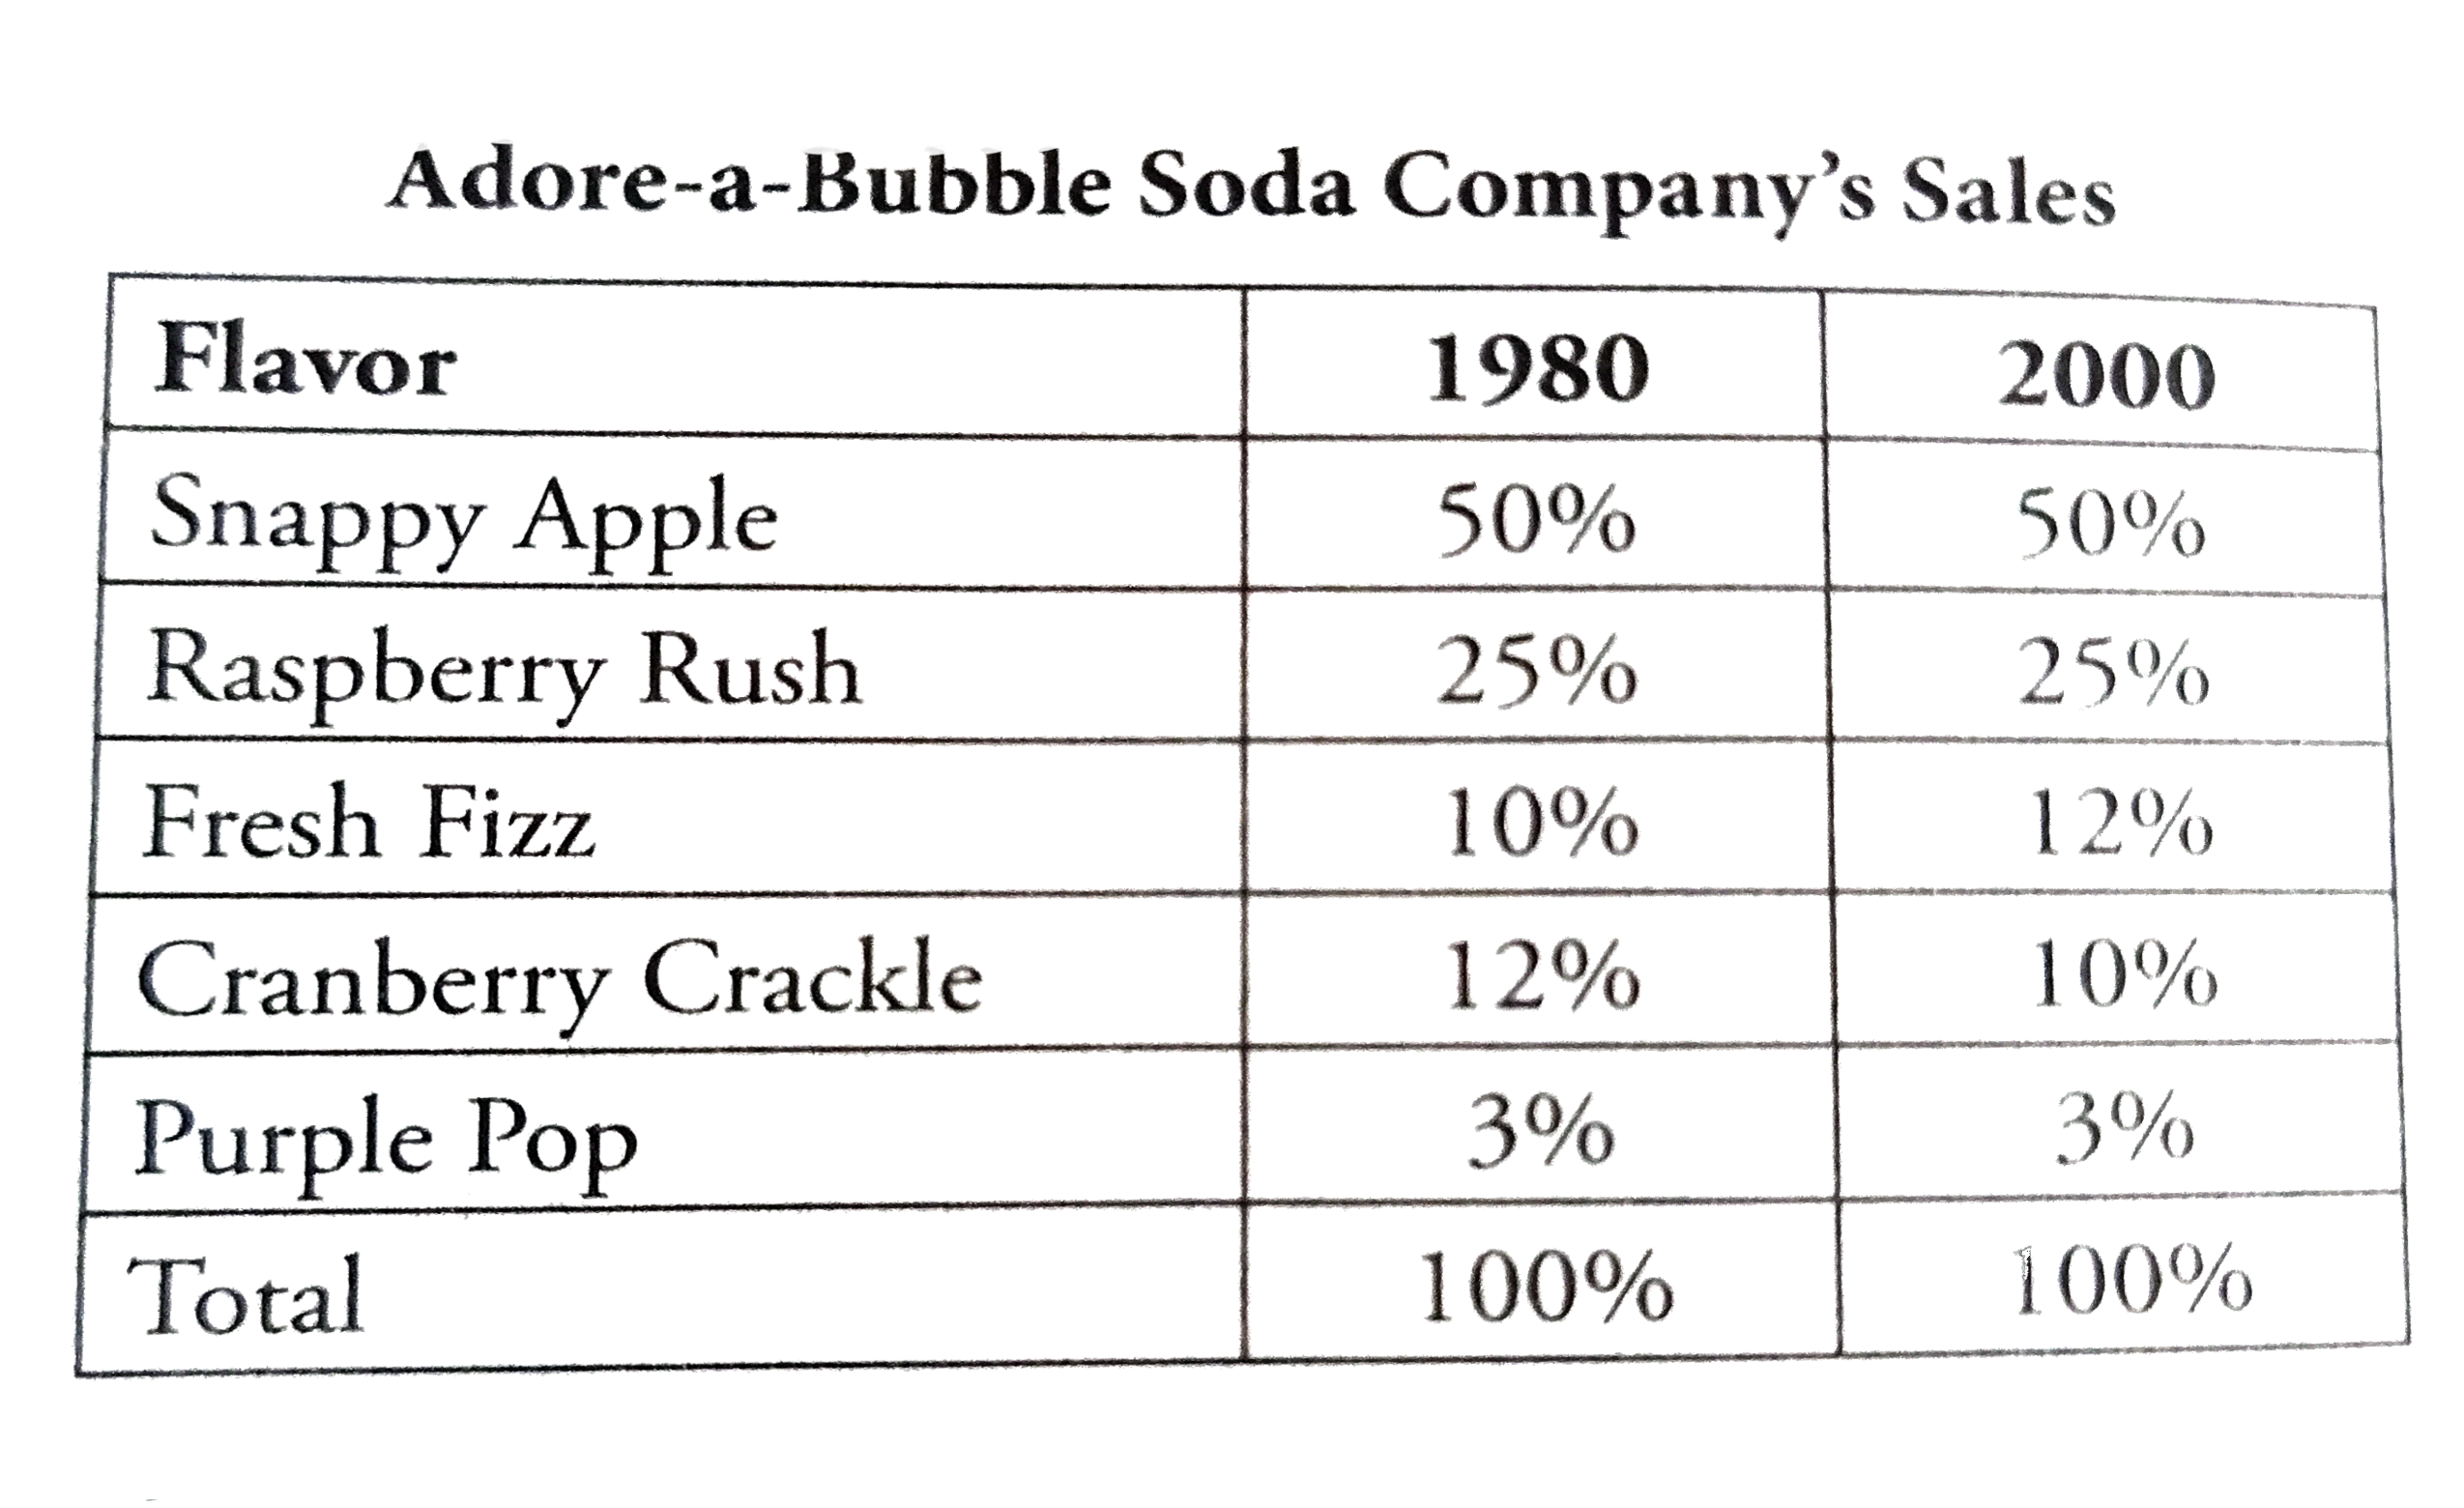 The table above shows the Adore-a-Bubble Soda Company's sales for 1980 and 2000. The company sold 200 trillion cans of soda in 1980. If the company sold 40 trillion more cans of soda in 2000 than it did in 1980, then for which flavor did the number of cans of soda increase by 20% from 1980 to 2000?